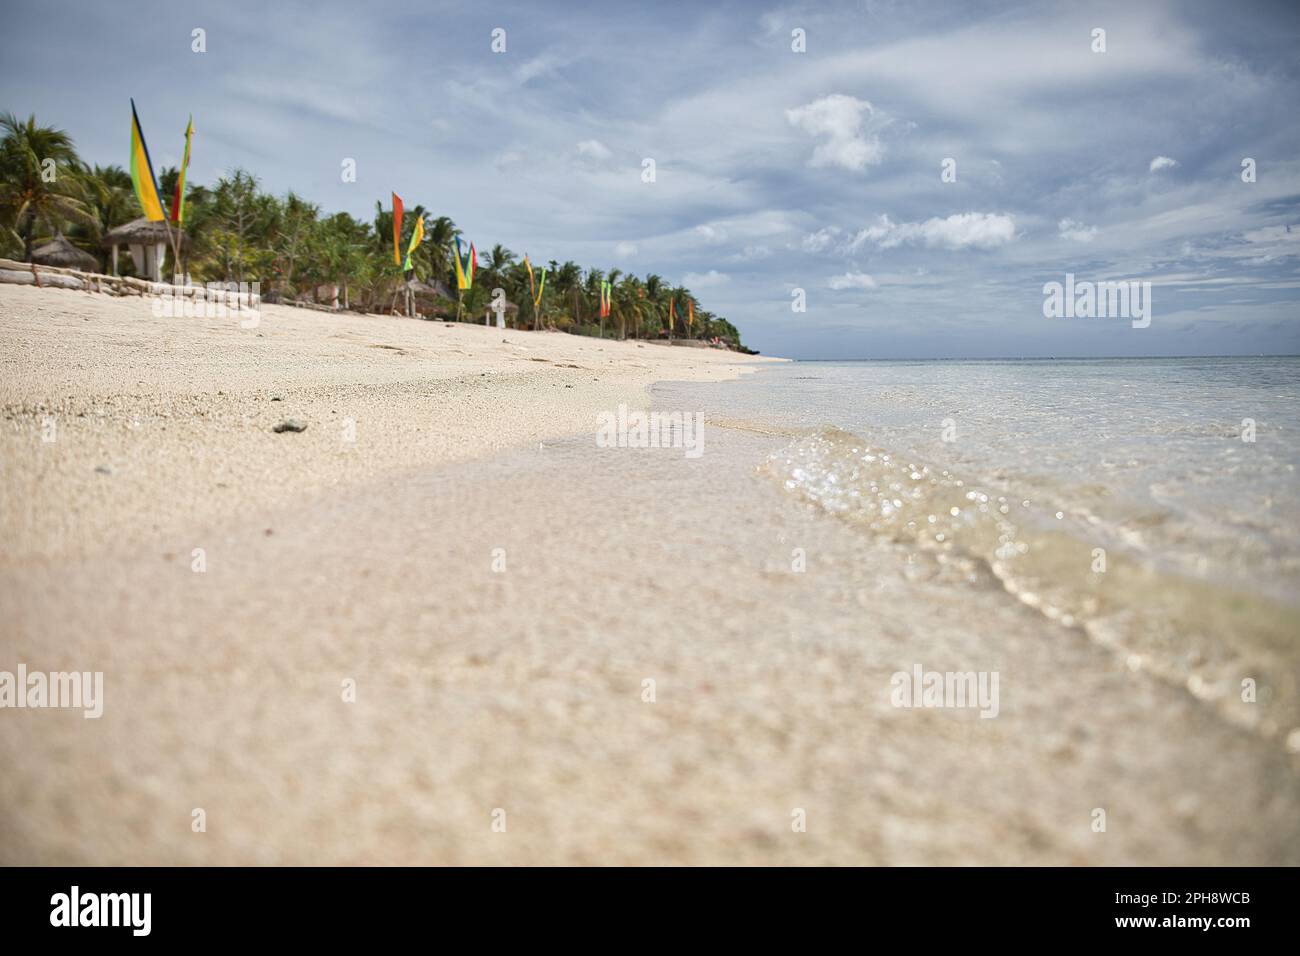 Dreamlike idyllic beach of Siquijor in the Philippines with palm trees along the beach. Stock Photo